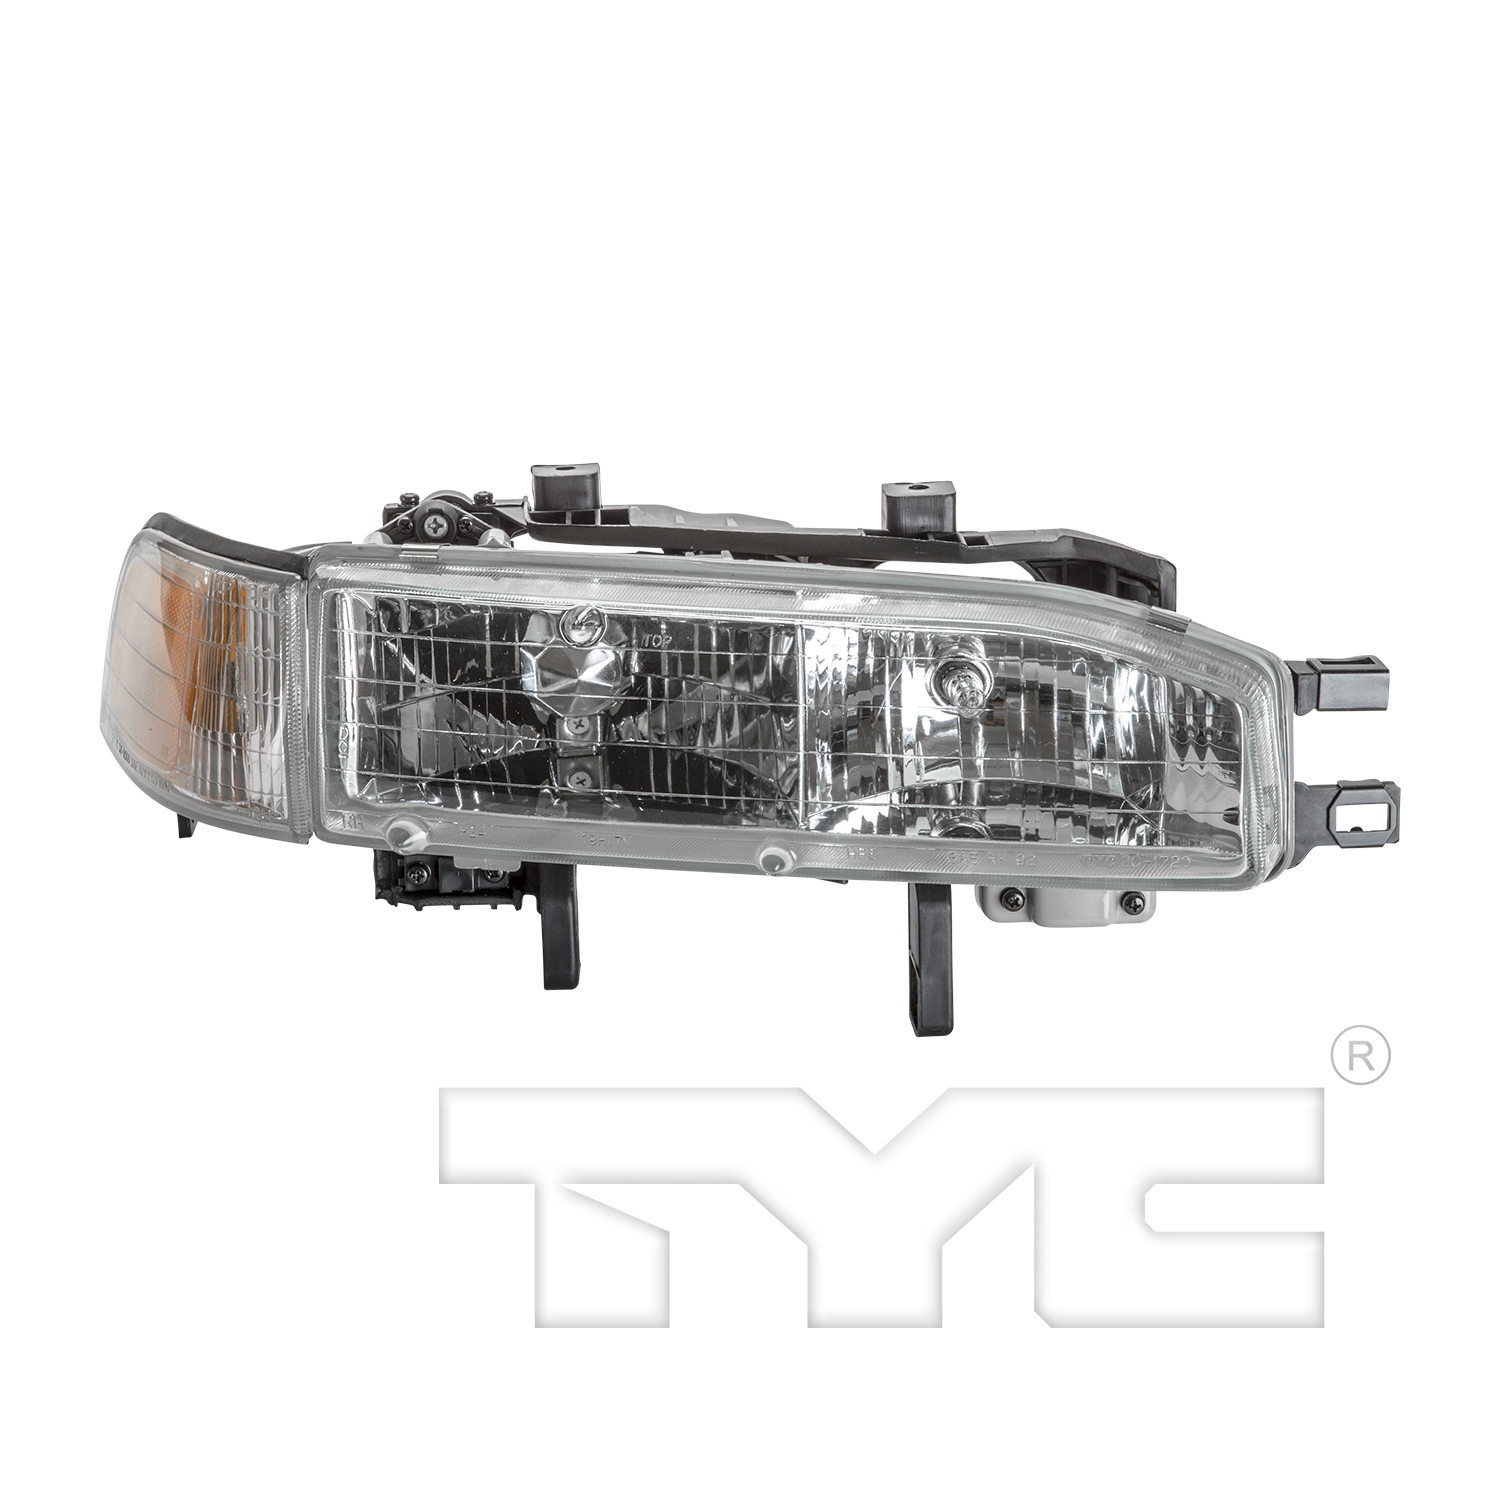 Aftermarket HEADLIGHTS for HONDA - ACCORD, ACCORD,92-93,RT Headlamp assy composite